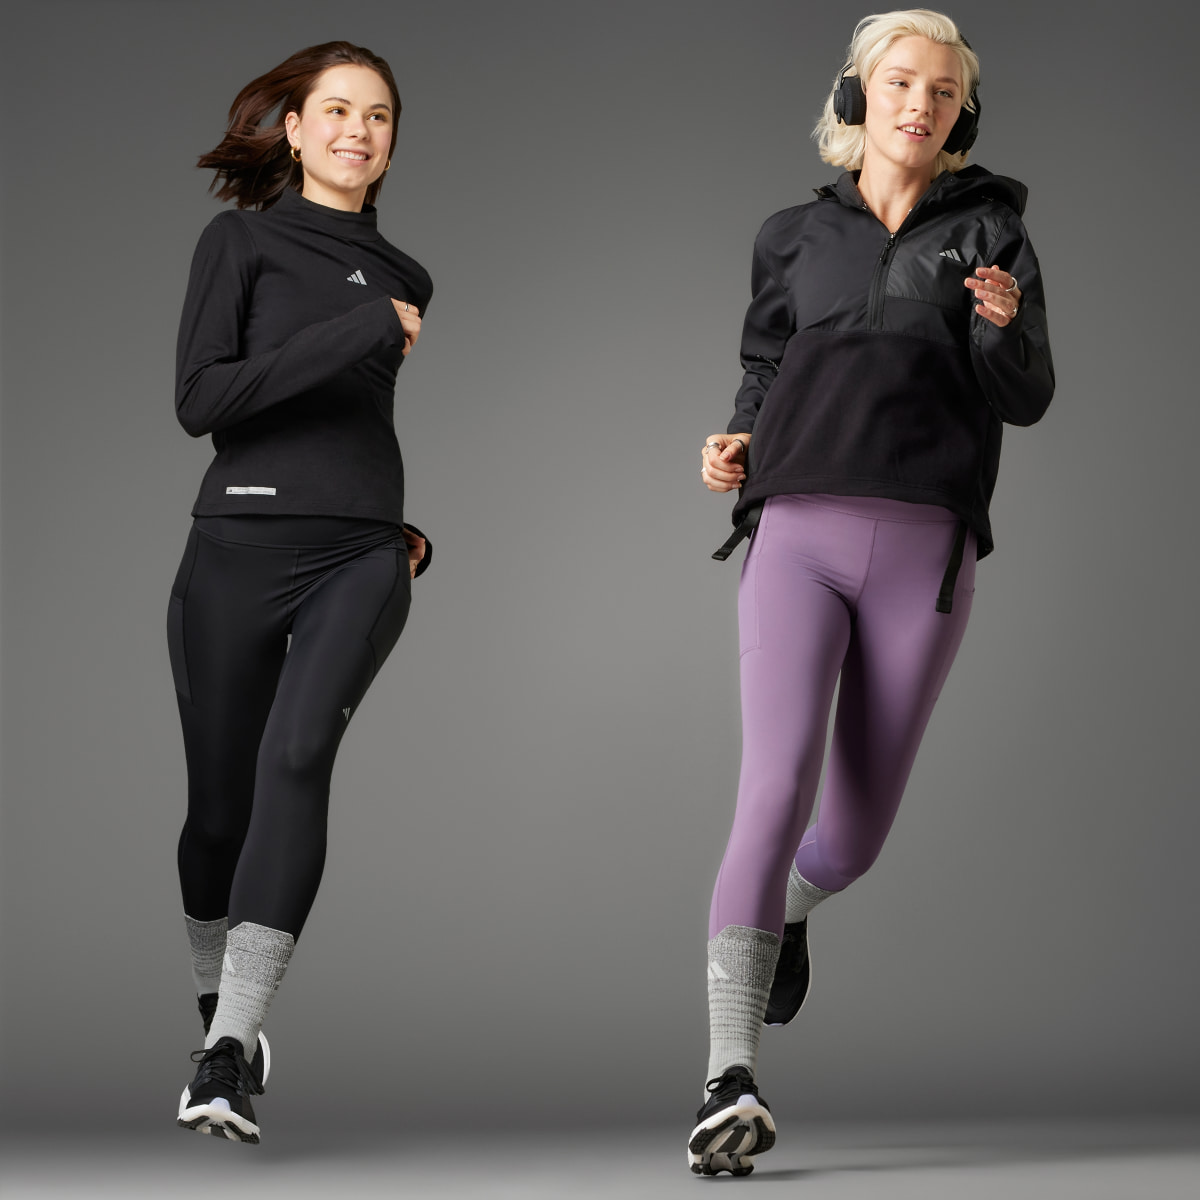 Adidas Ultimate Running Conquer the Elements Merino Long Sleeve Long-sleeve Top. 8